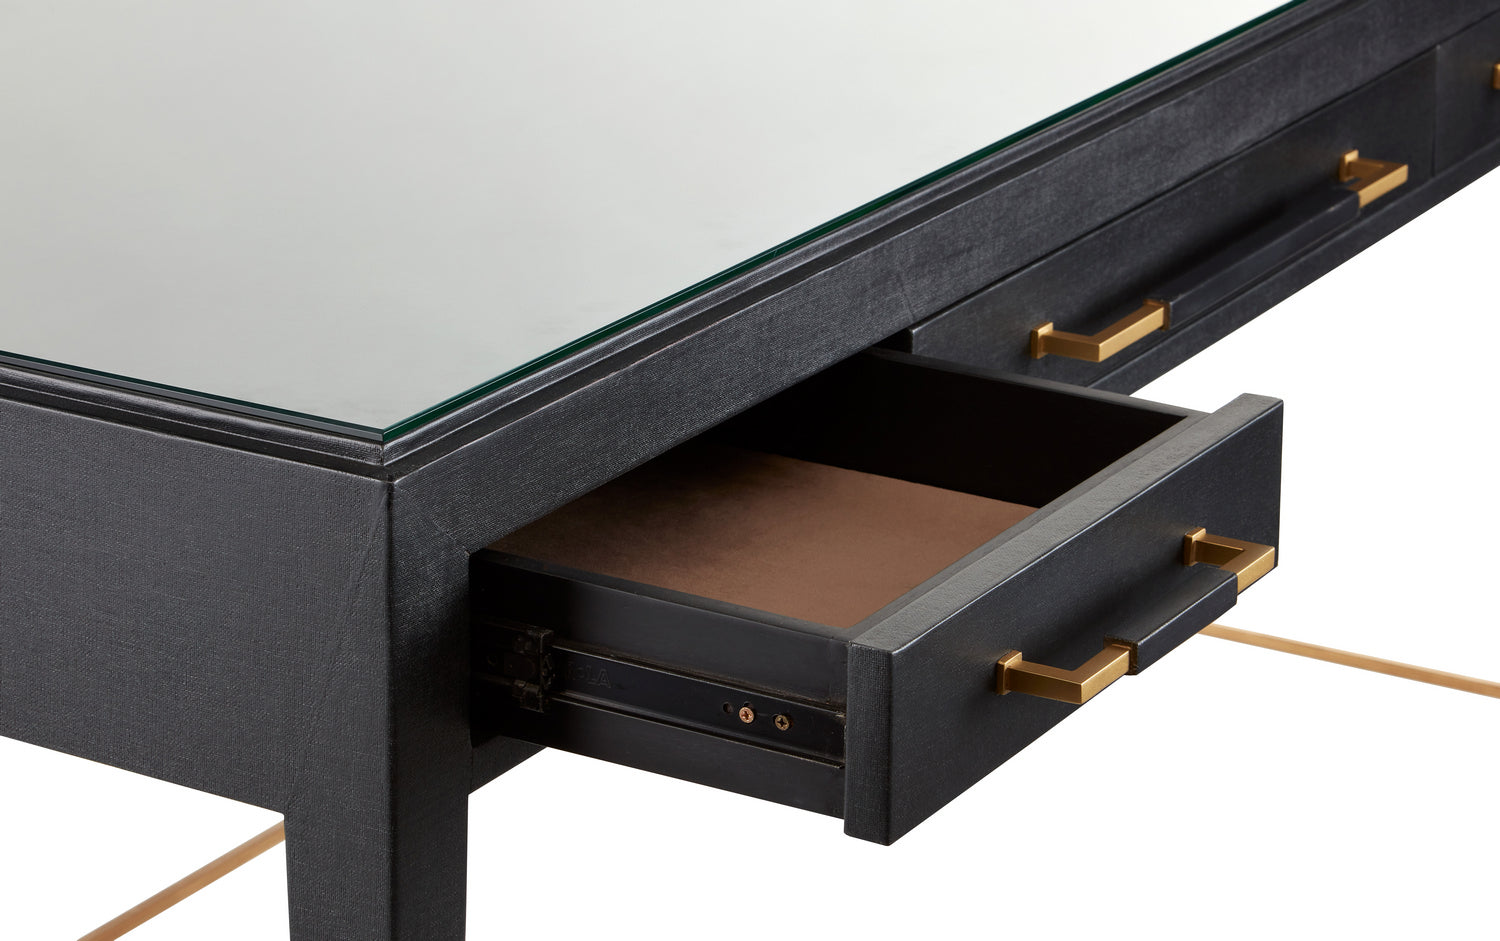 Desk from the Verona collection in Black Lacquered Linen/Champagne Metal finish